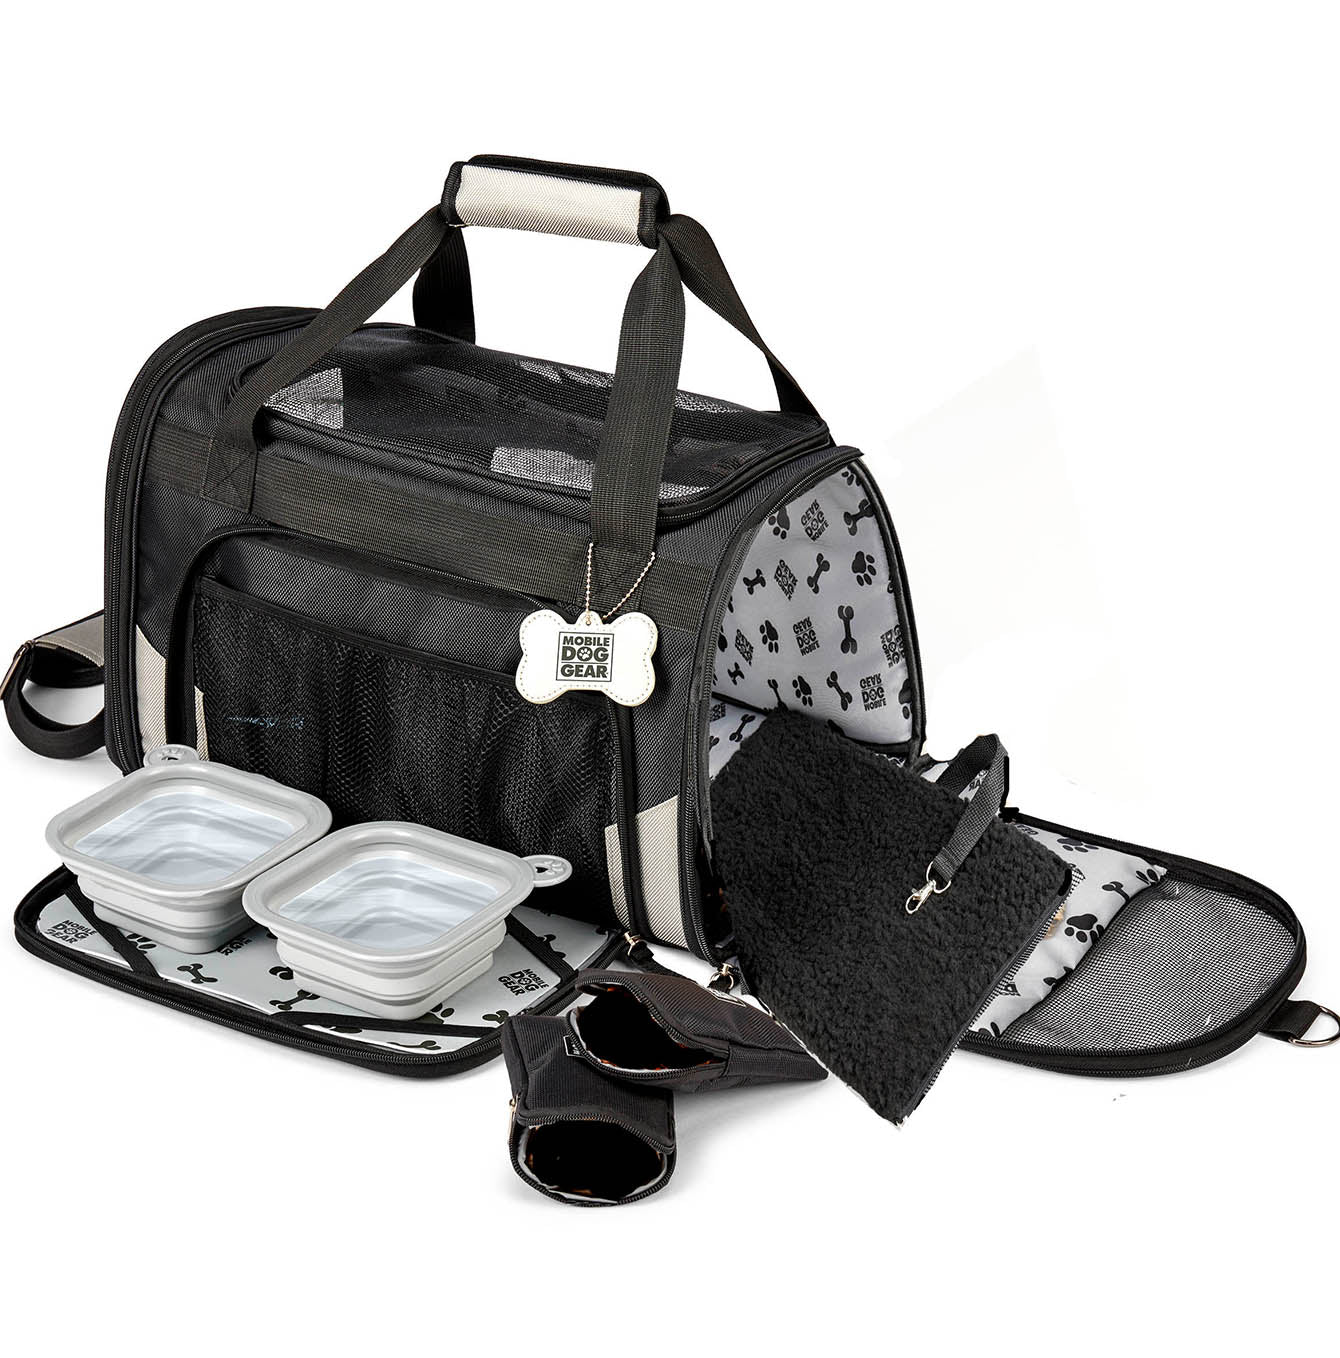 Discover, Mobile Dog Gear Pet Carrier, in Black. The Perfect Away Bag for any Pet Parent, Featuring dividers to stack food and removable padded Bottom. Also Included feeding set, collapsible silicone bowls and placemat! The Perfect Gift For travel, meets airline requirements. Available Now at Lords & Labradors